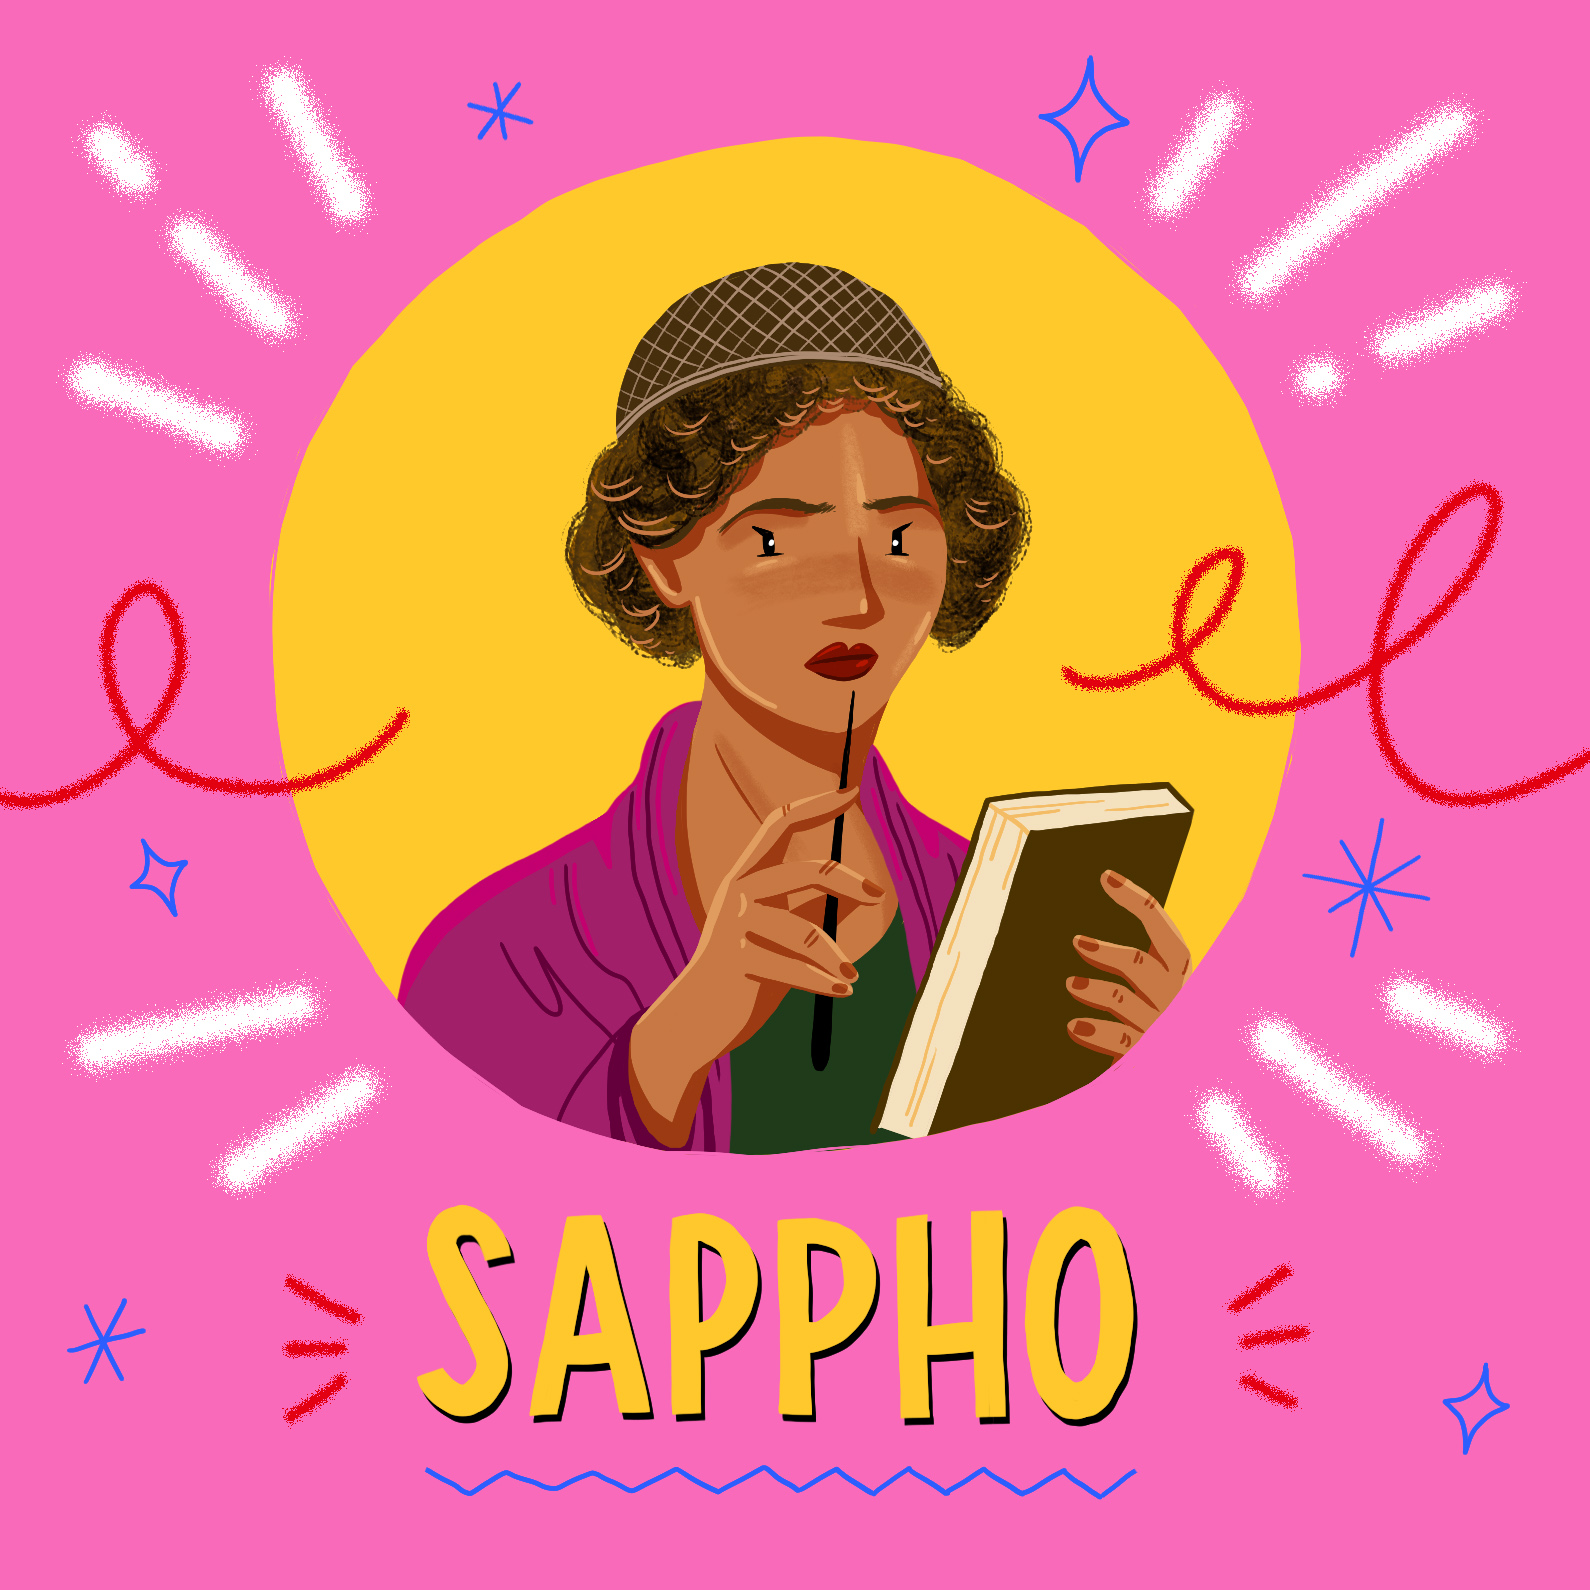 Poet Sappho holding pen and book, with crowned braids wrapped around hair